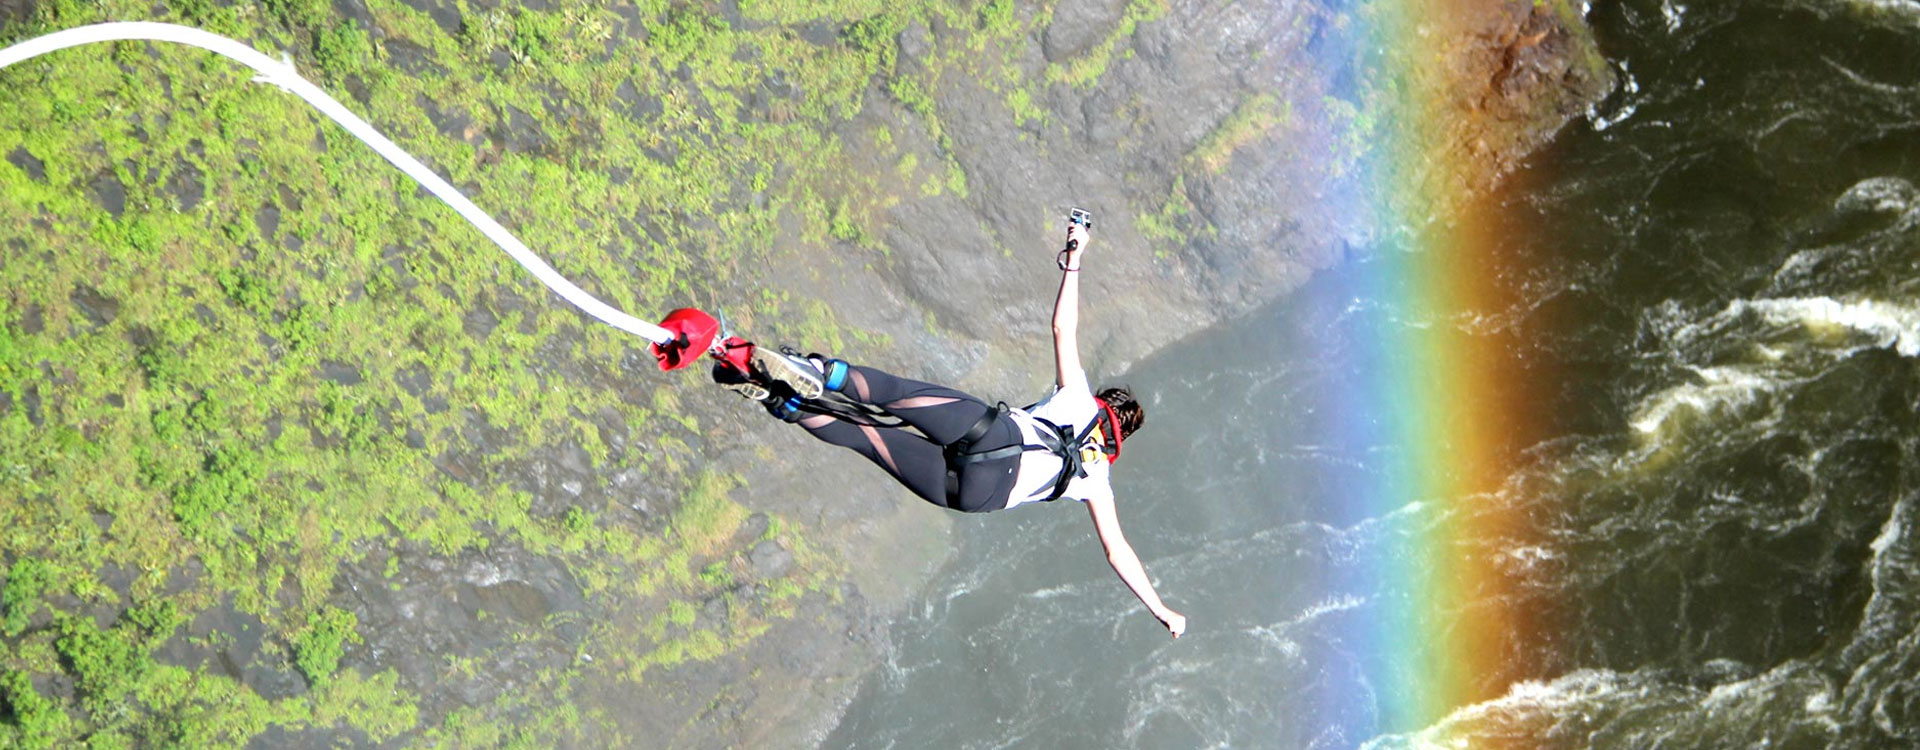 Victoria Falls Bungee Jumping 